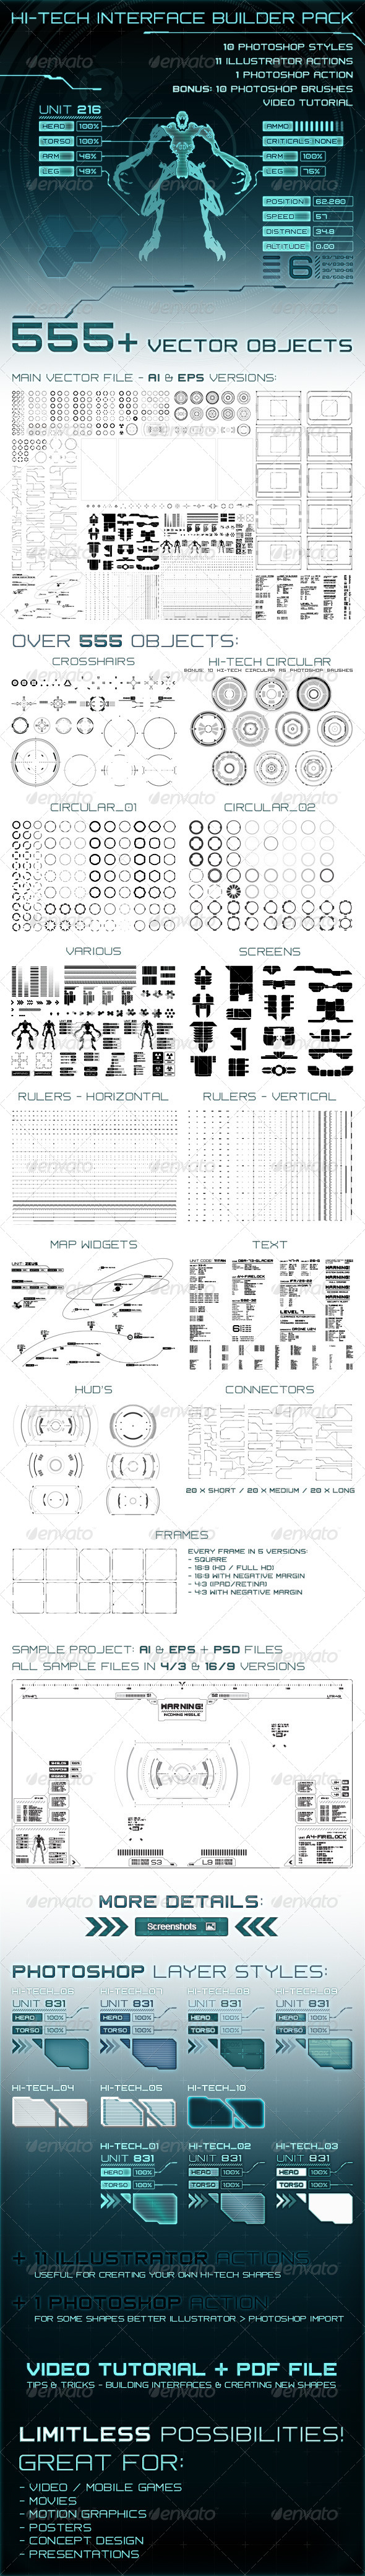 GraphicRiver Hi-Tech Interface Builder Pack 7694953